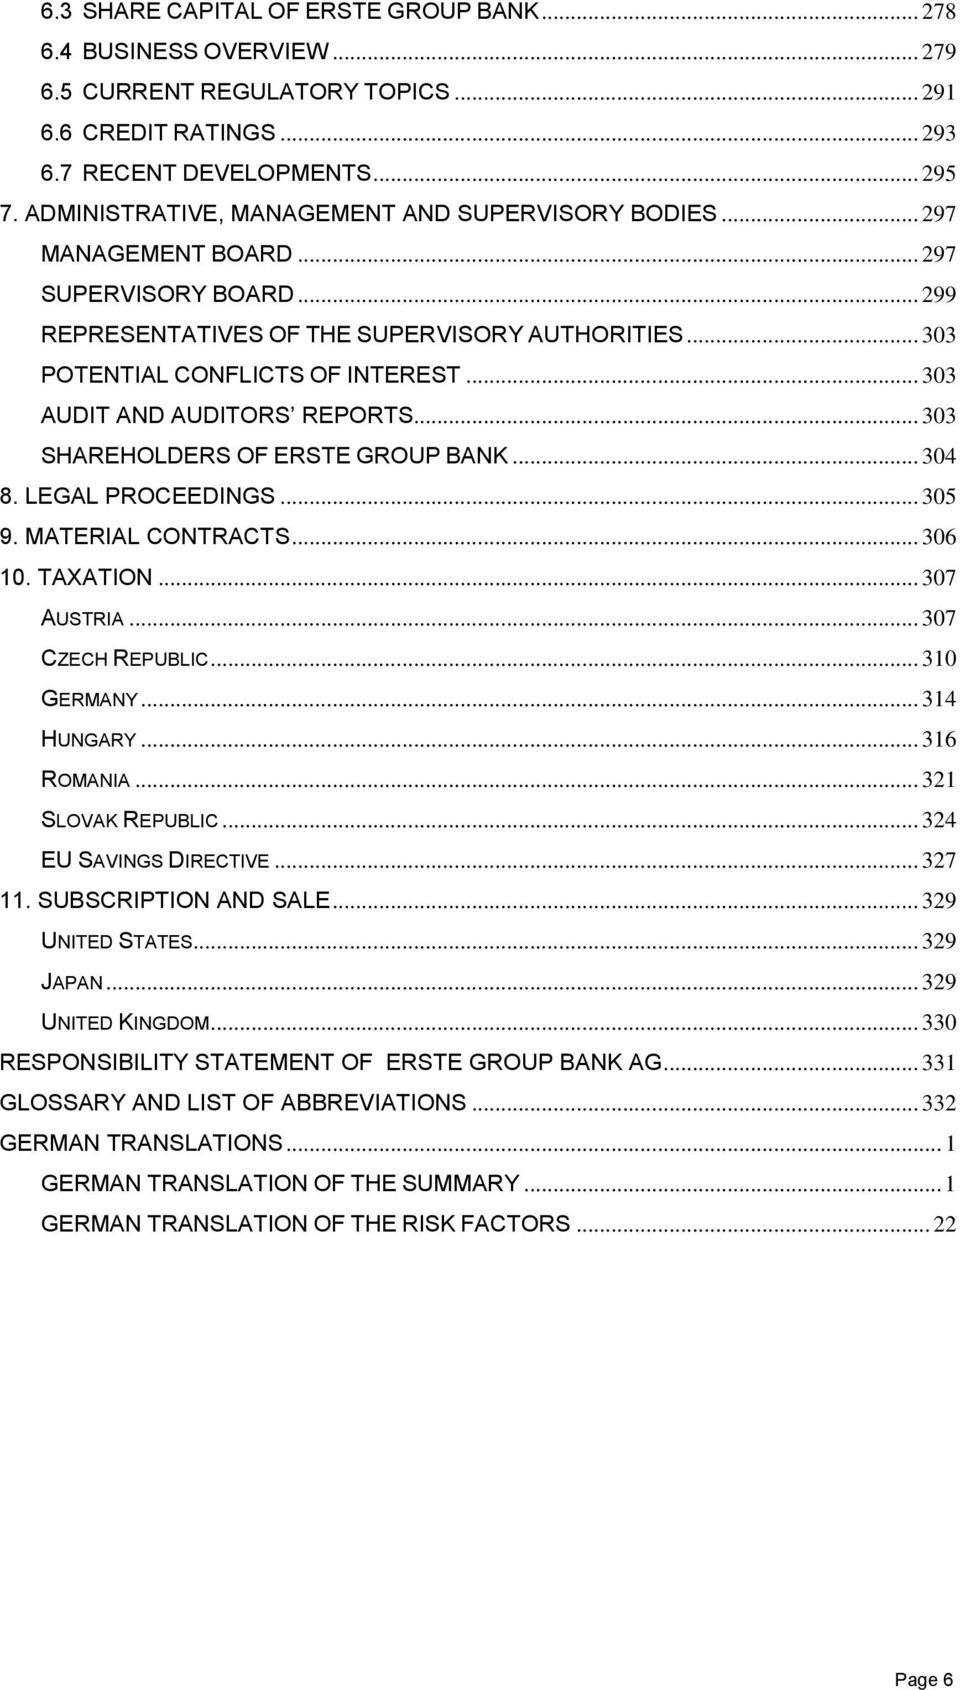 .. 303 AUDIT AND AUDITORS REPORTS... 303 SHAREHOLDERS OF ERSTE GROUP BANK... 304 8. LEGAL PROCEEDINGS... 305 9. MATERIAL CONTRACTS... 306 10. TAXATION... 307 AUSTRIA... 307 CZECH REPUBLIC.